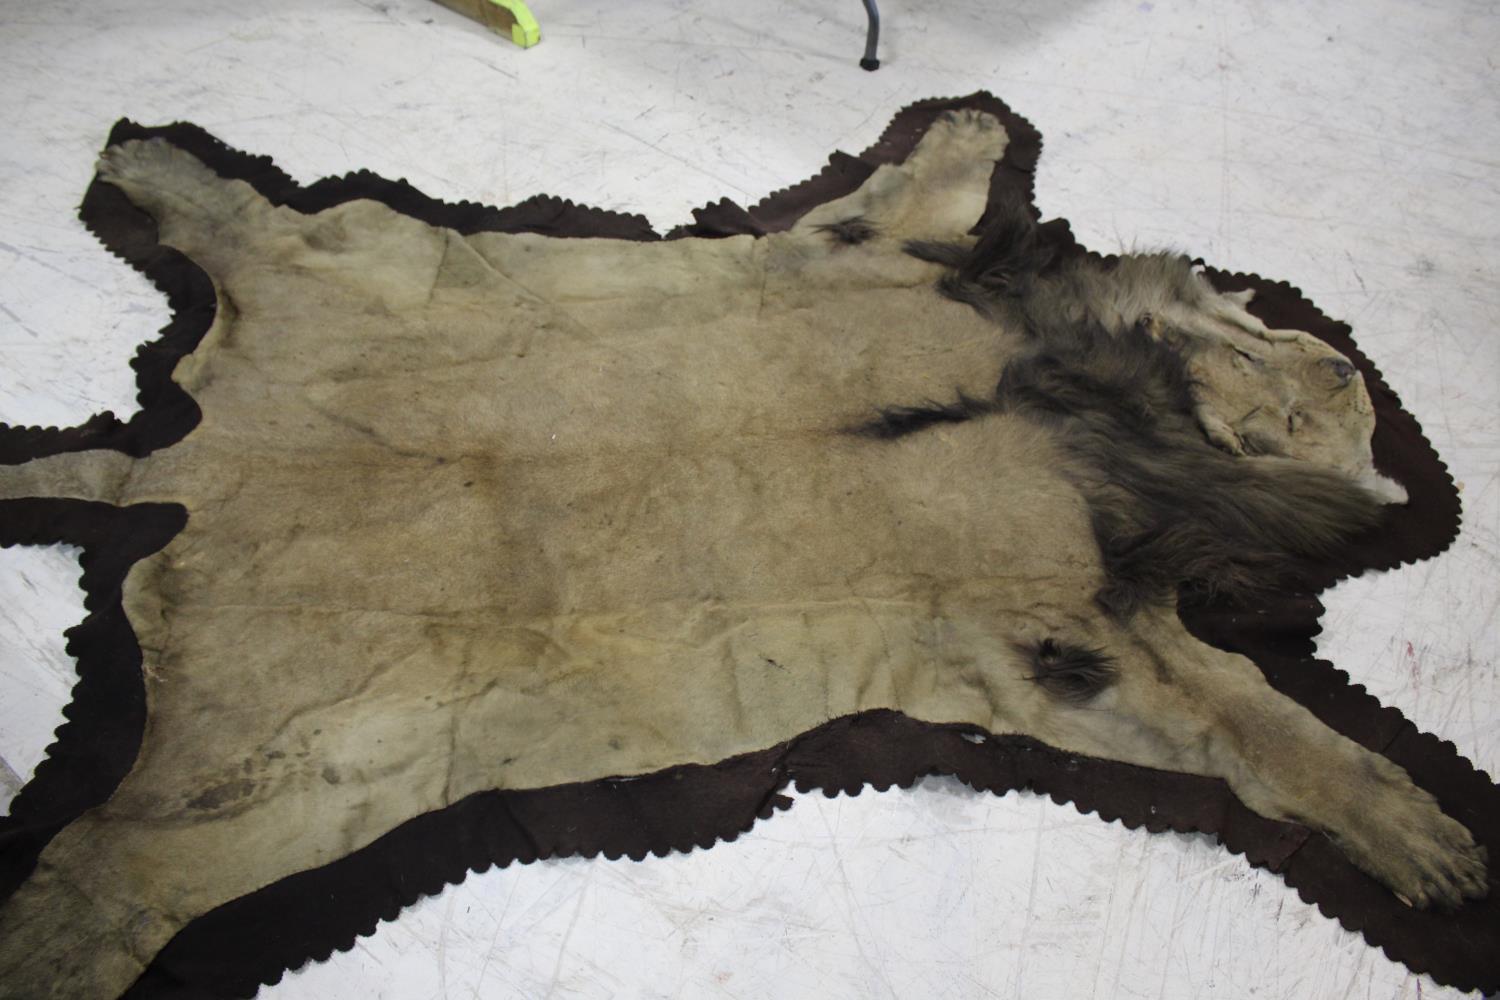 PETER SPICER & SONS - LION SKIN a full mounted flat Lion skin, mounted on a material backing. With a - Image 10 of 11